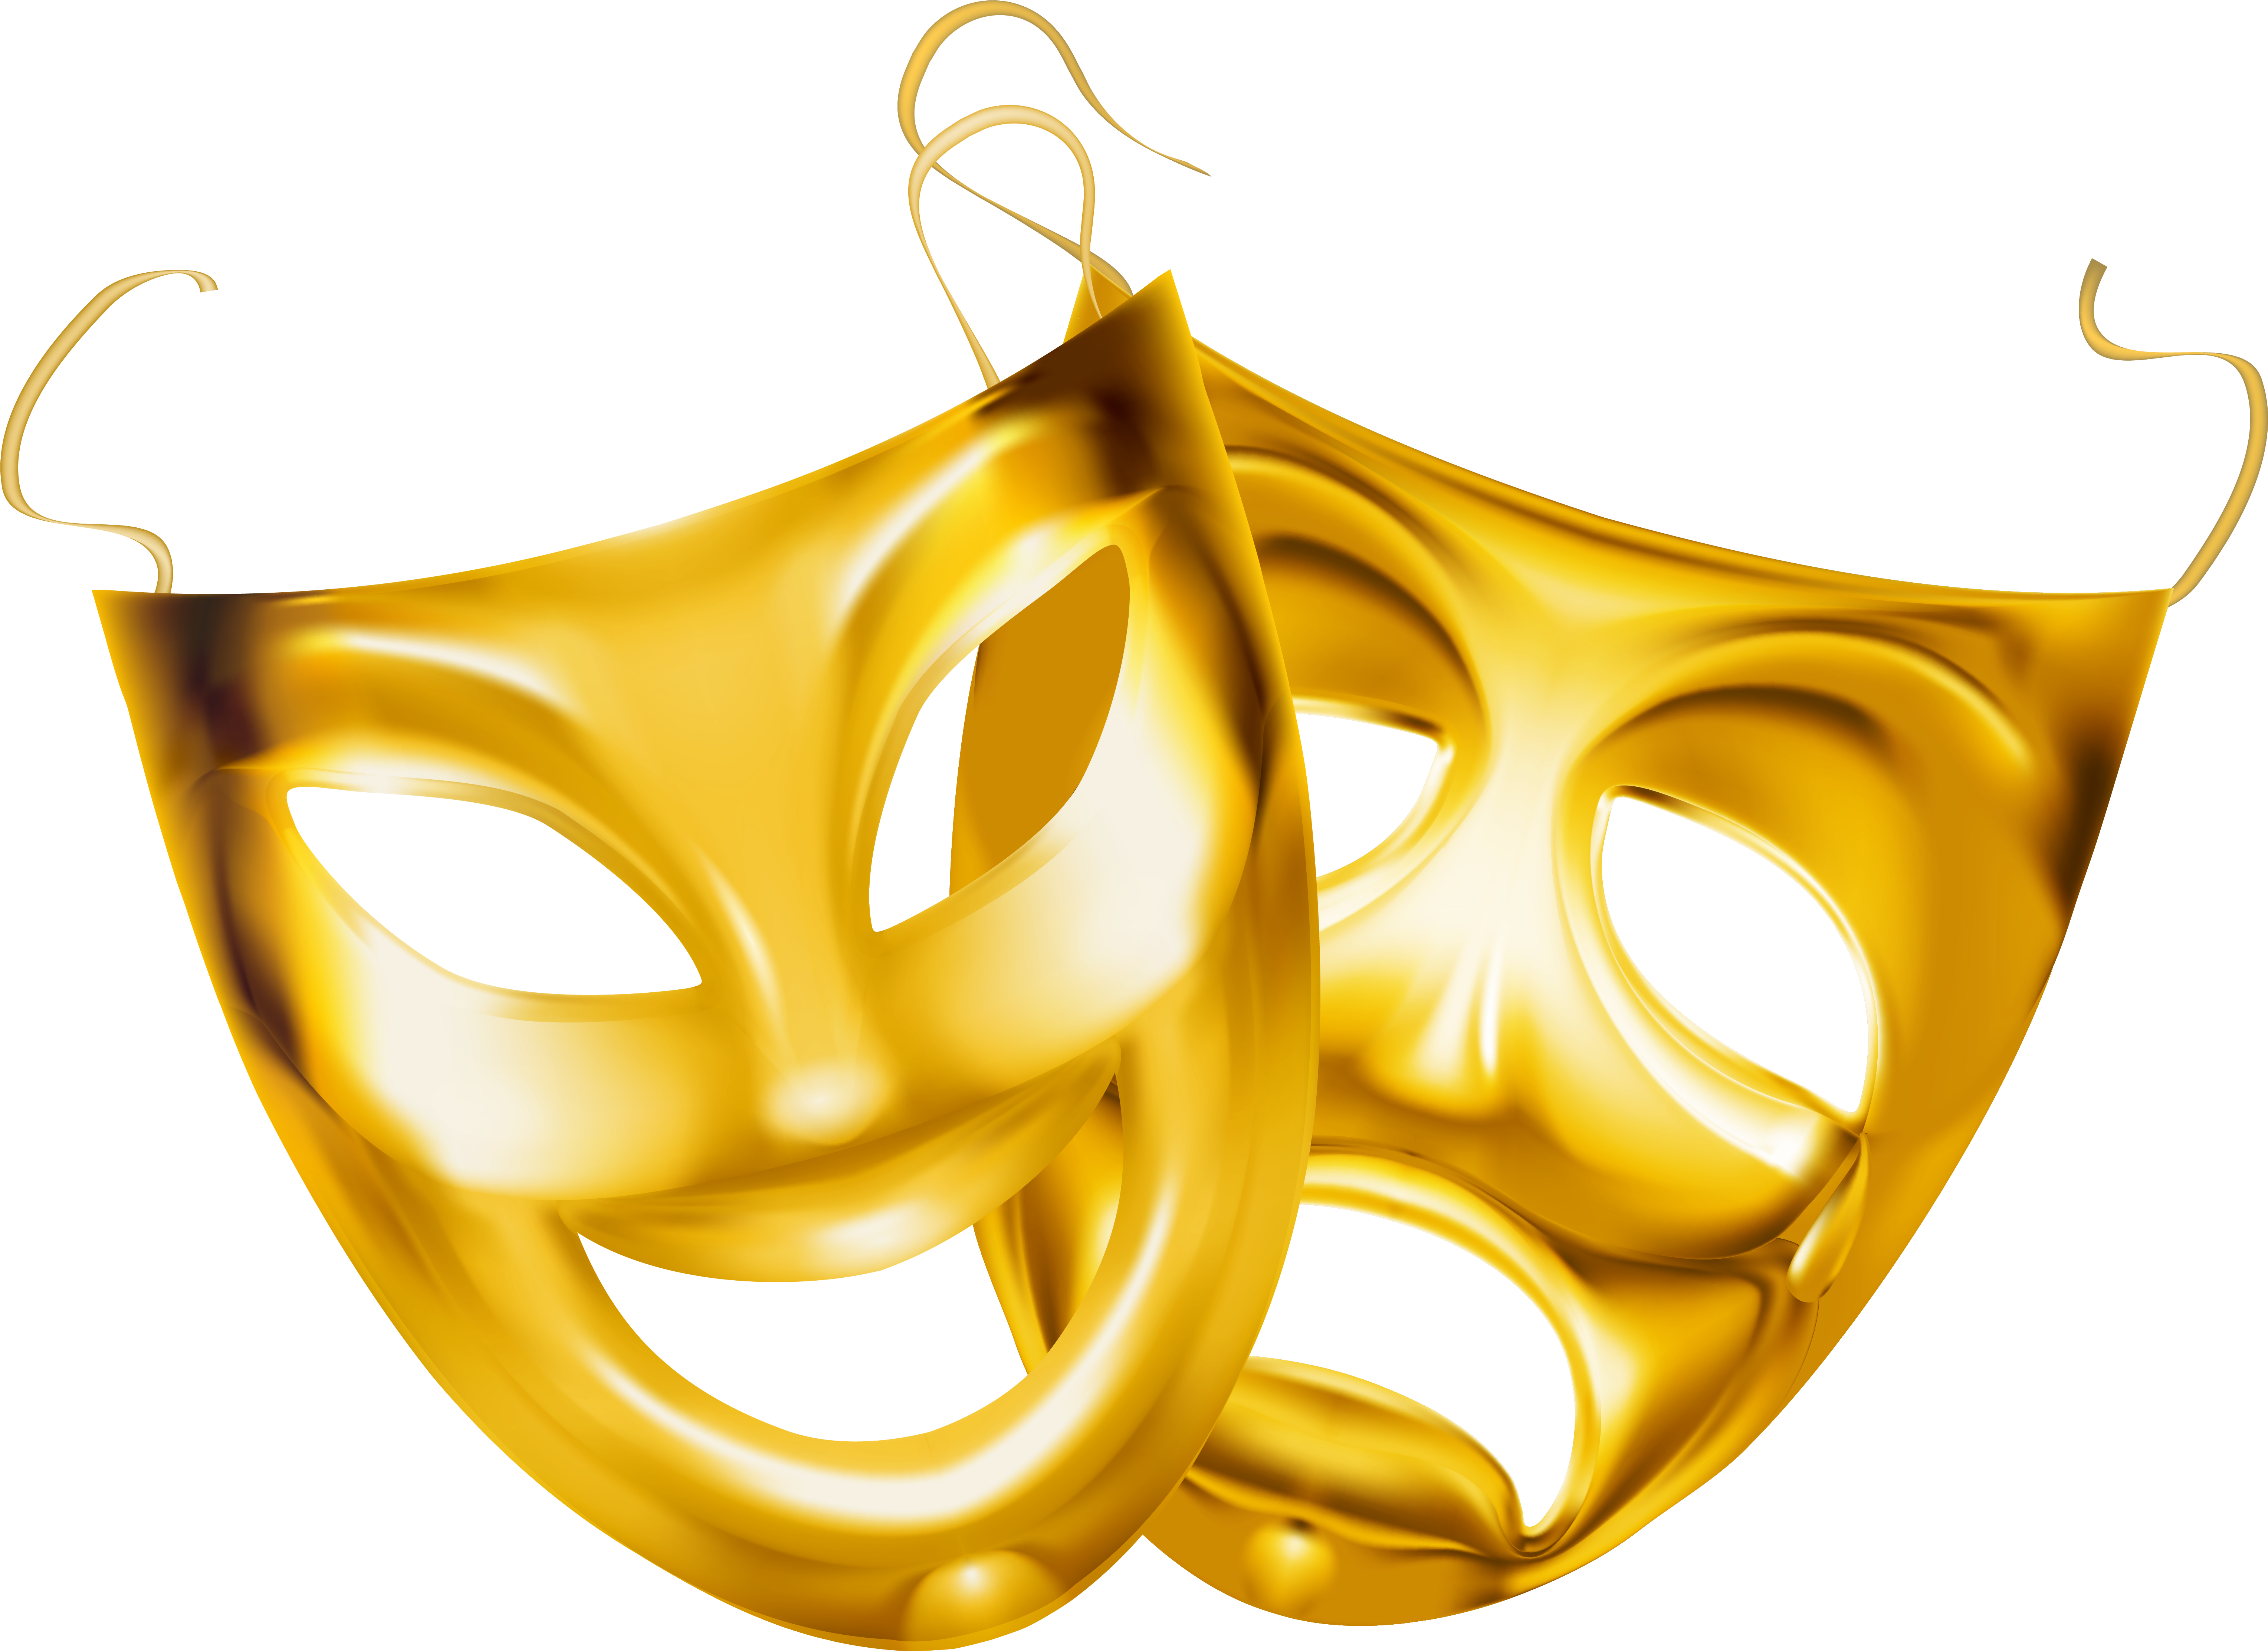 Gold Theater Masks Png Clipart Image Png M 1443063301 - Theatre .png (6268x4562)